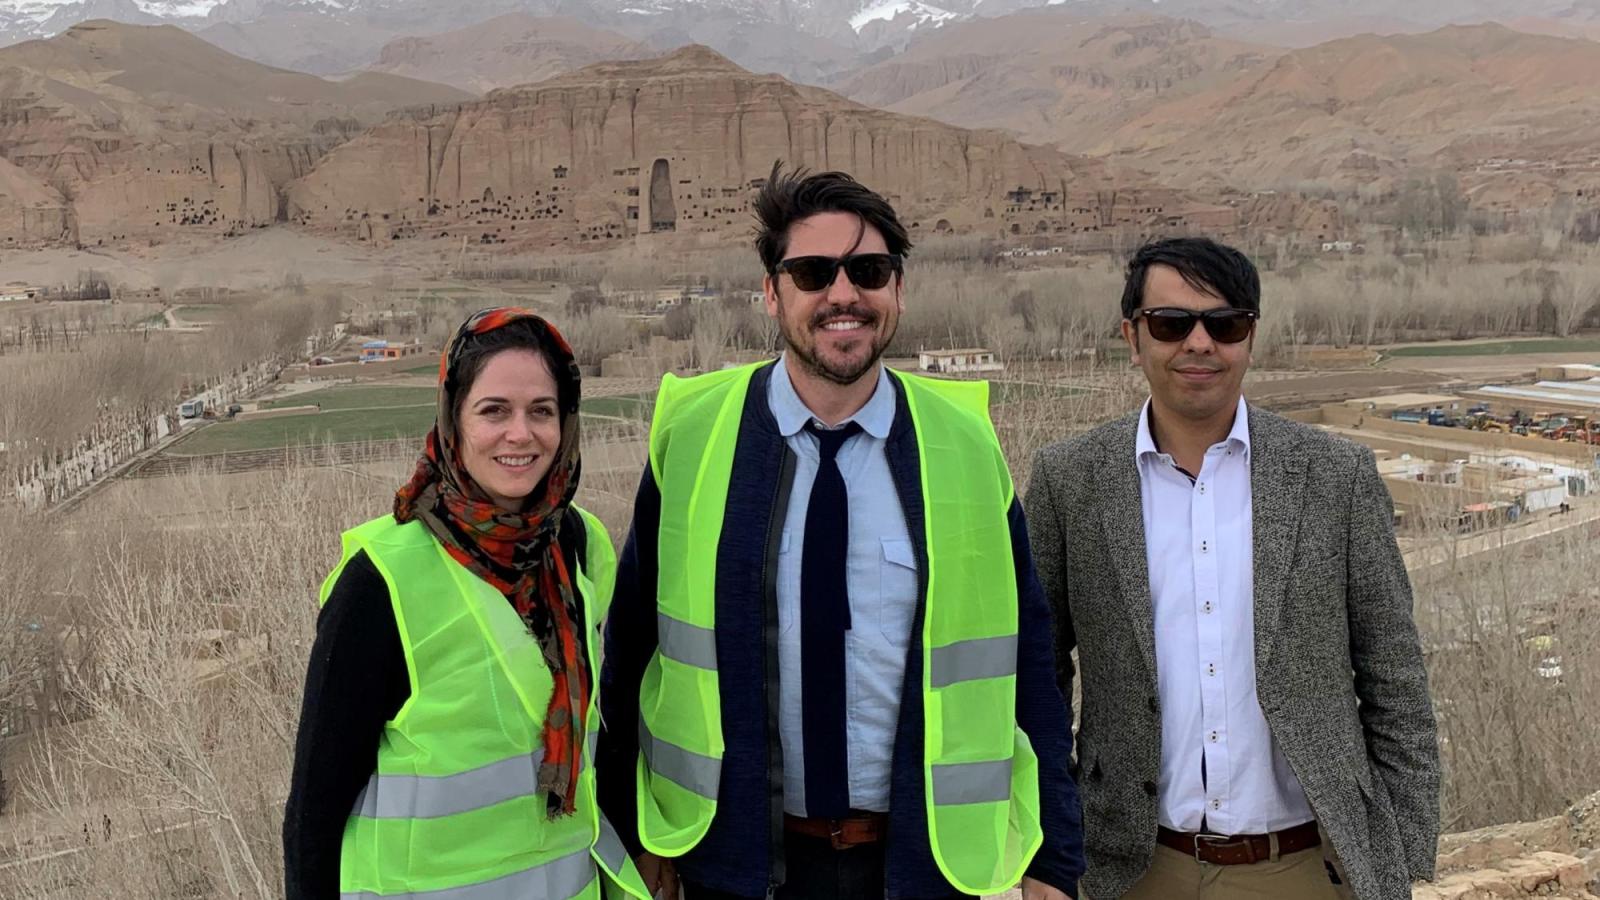 Rory Burke (center) in Bamyan, Afghanistan with colleagues Talia and Soroush